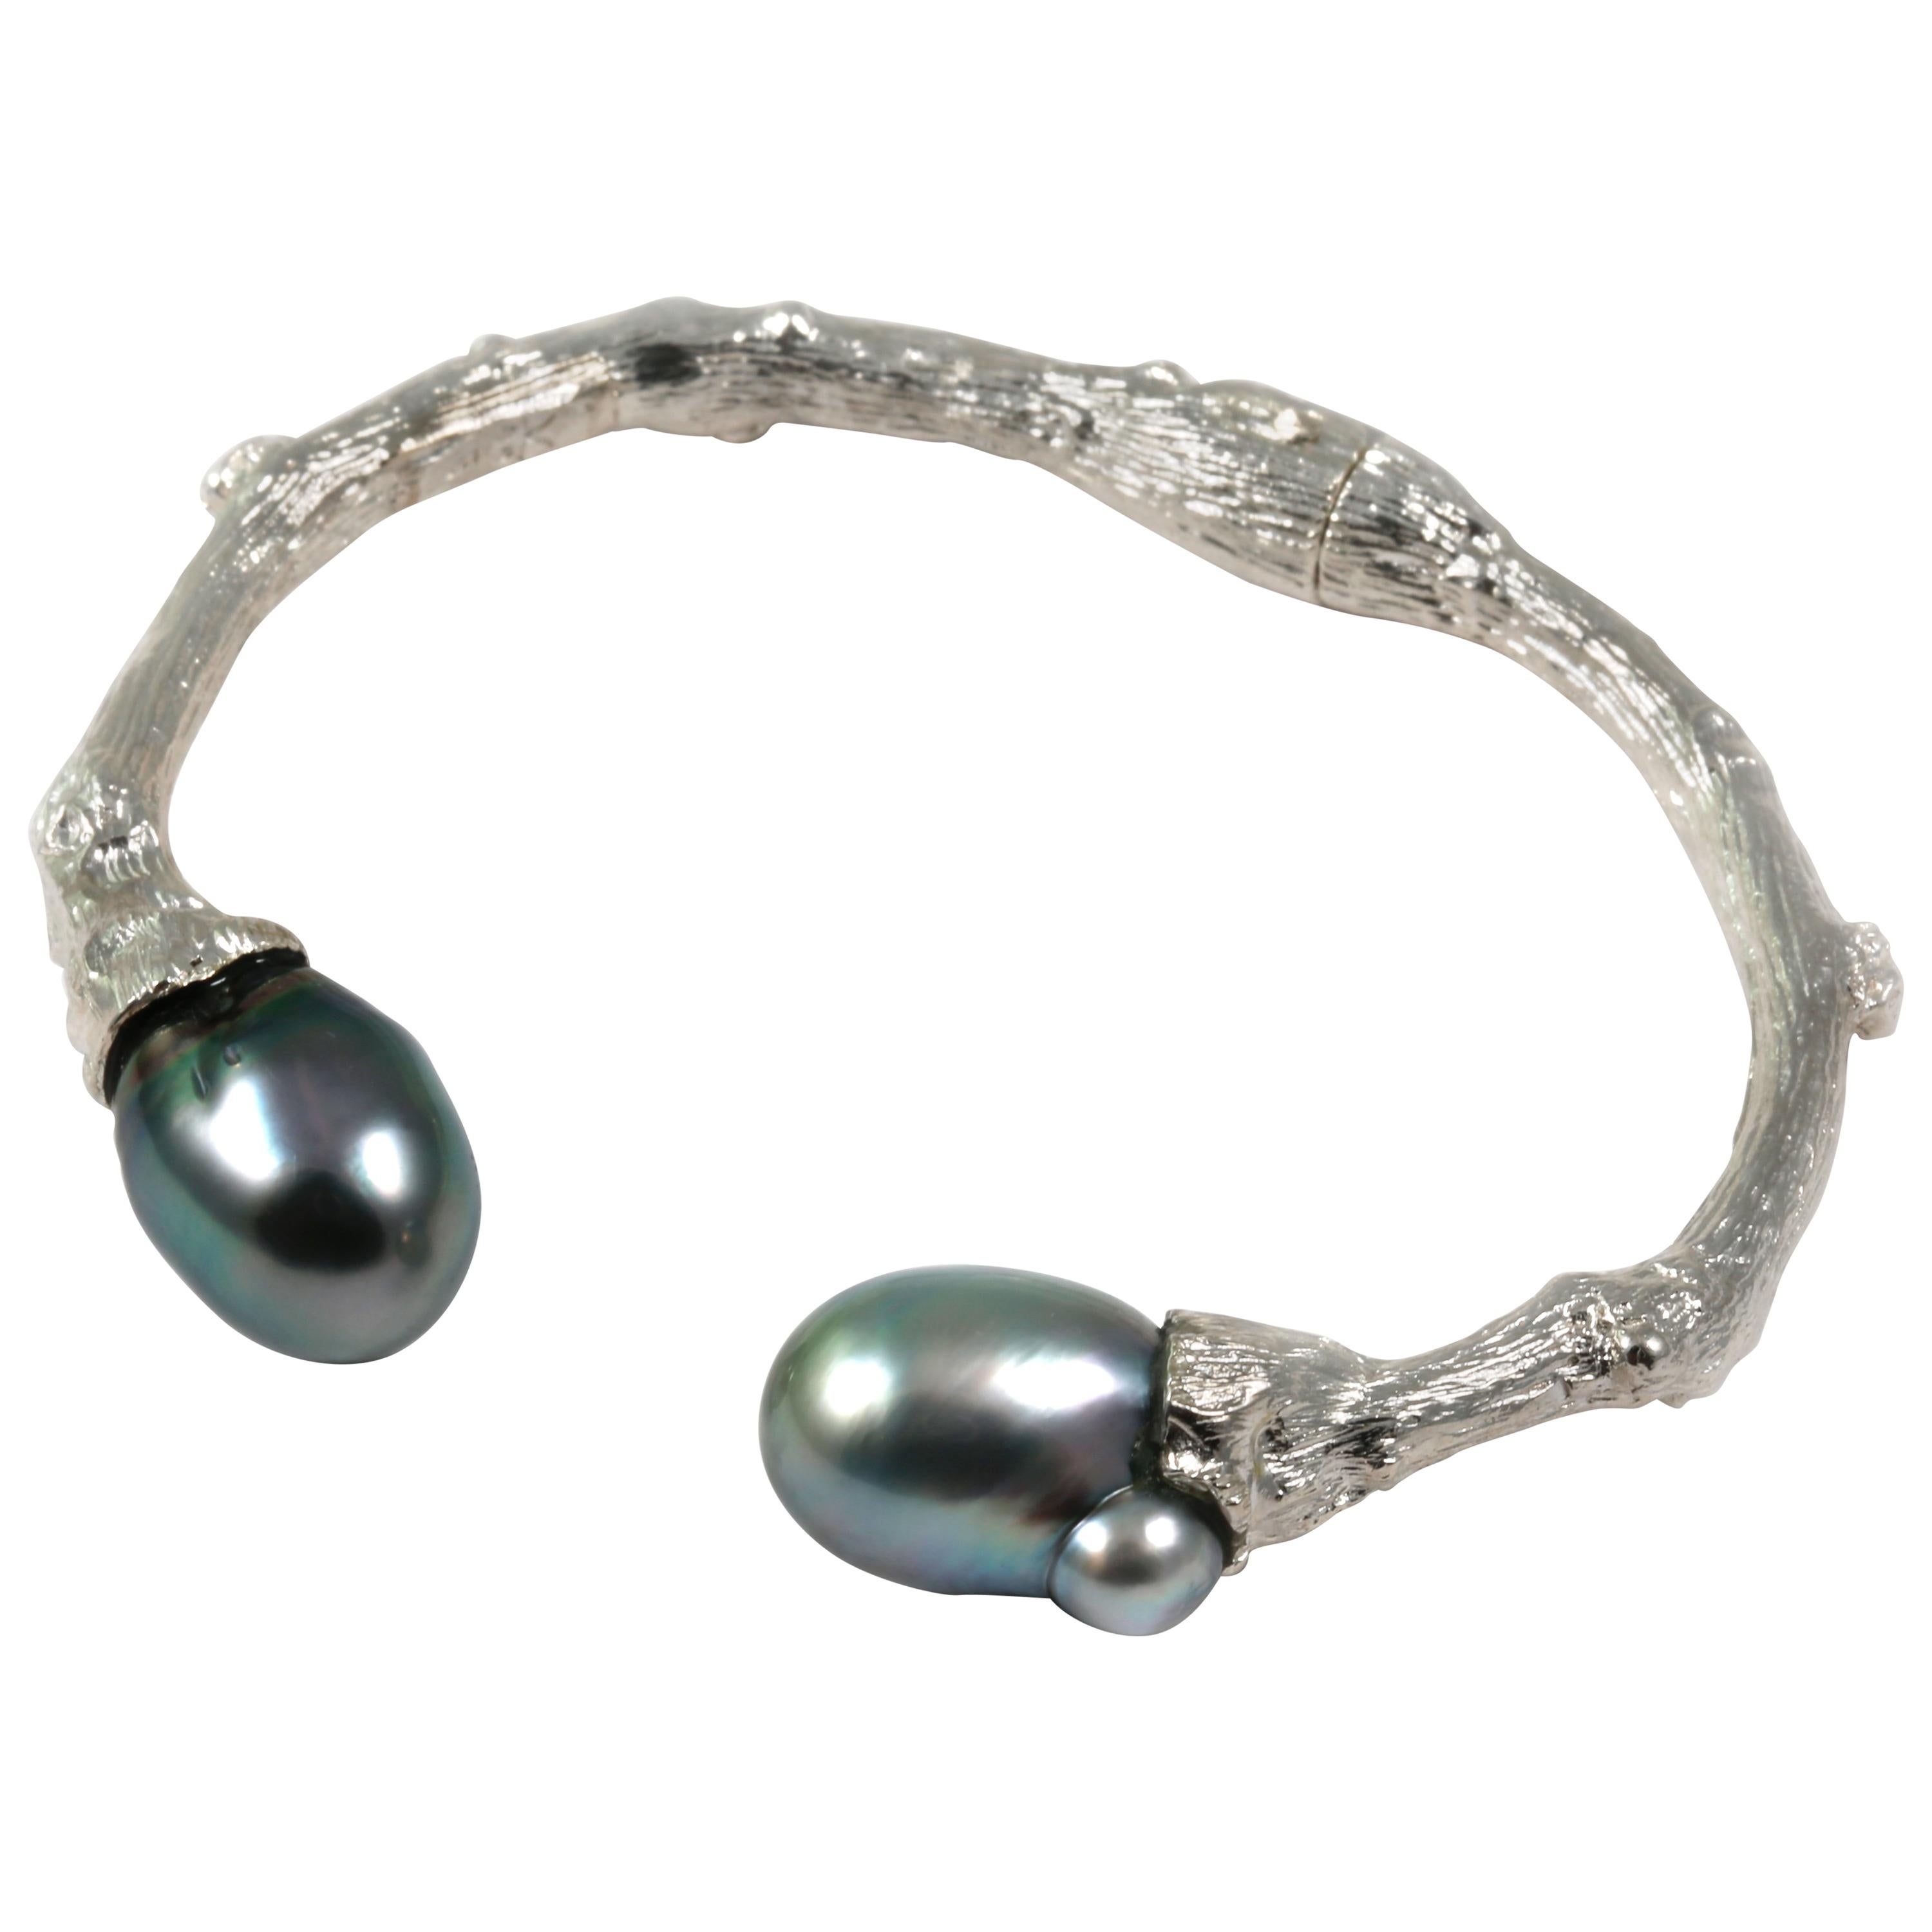 Cuff in Sterling Silver or Oxidized Silver with Tahitian Pearls